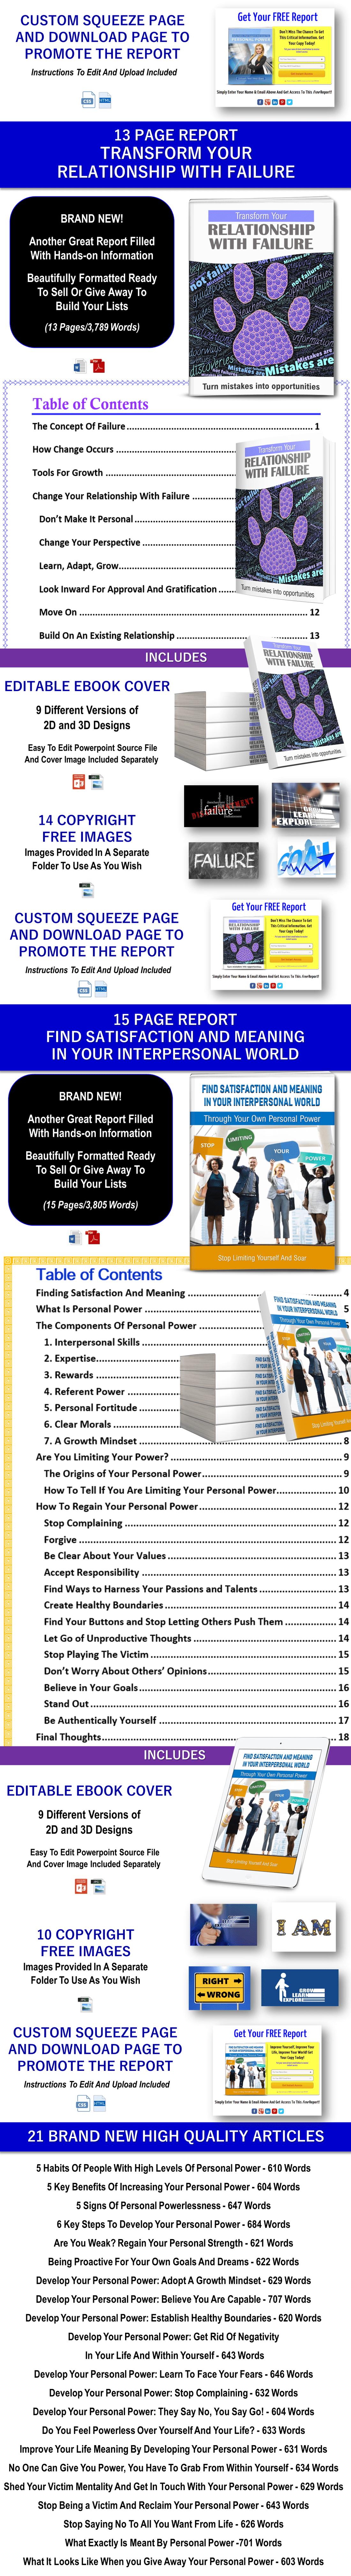 Increase your Personal Power Content With PLR Rights